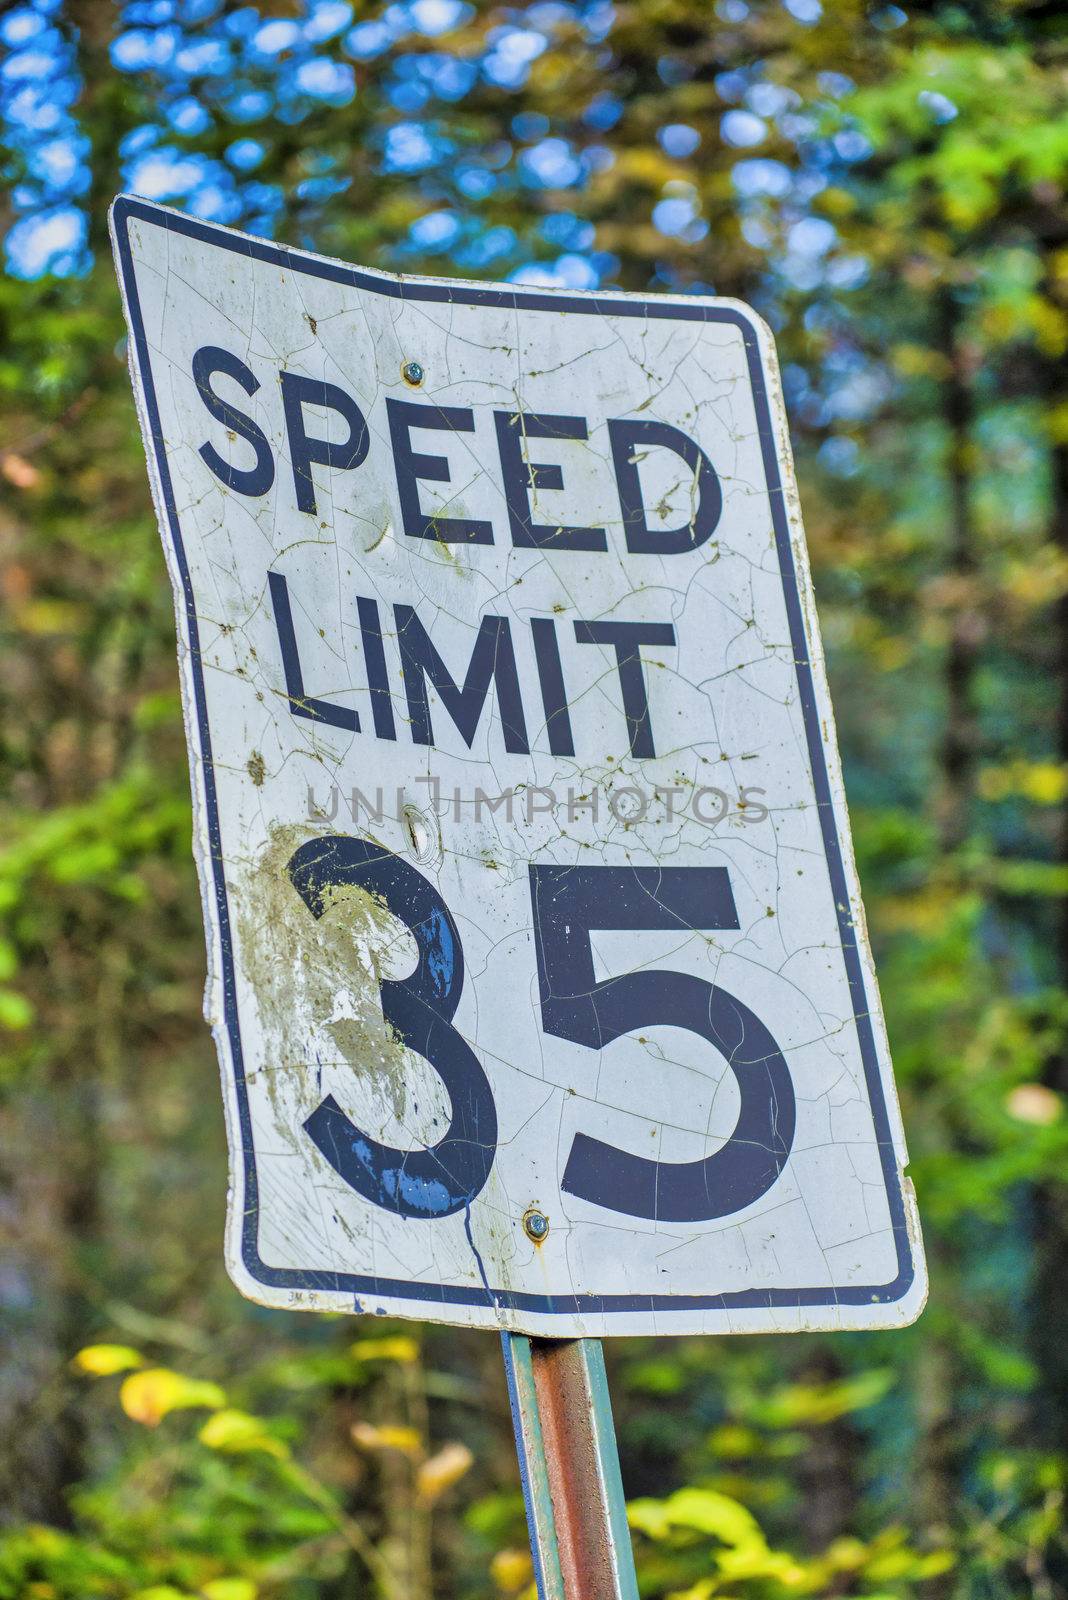 Speed Limit 35 Miles per Hour street sign in the woods by jovannig